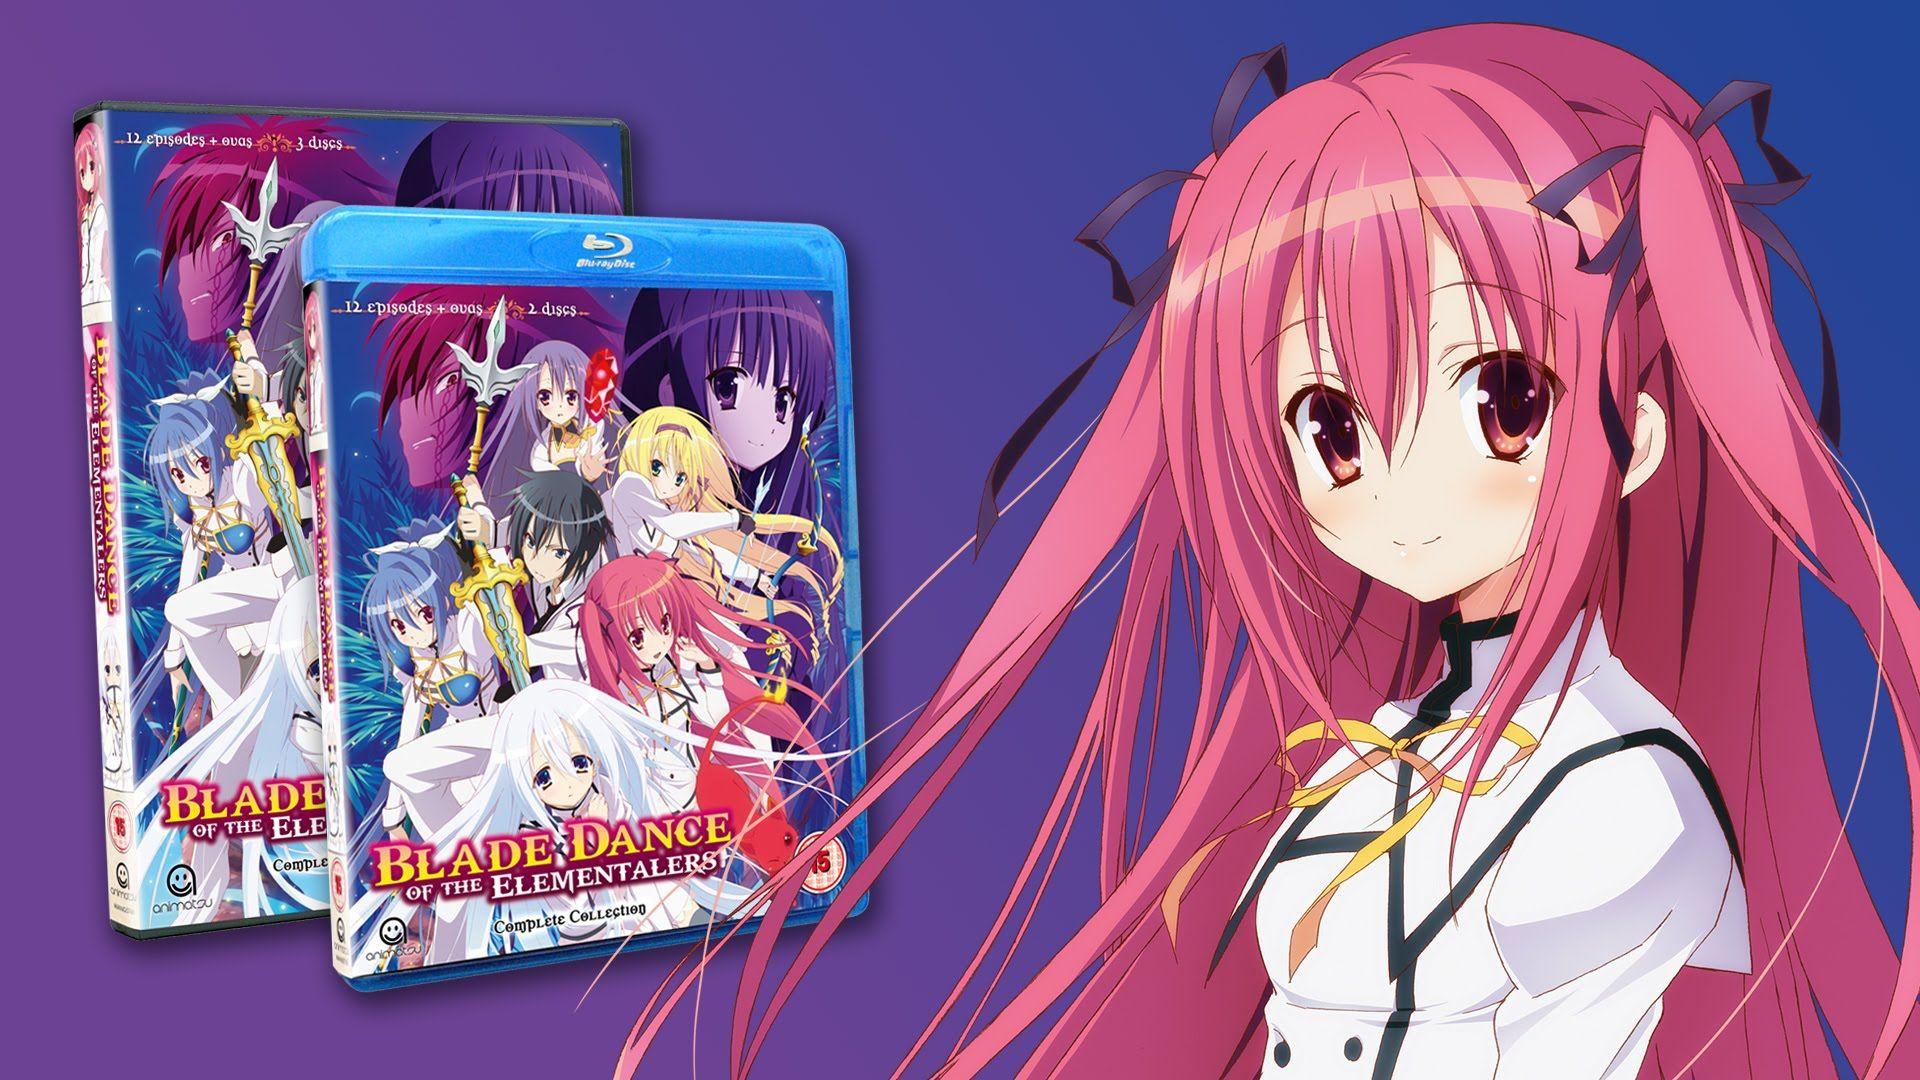 Blade Dance of the Elementalers Complete Season 1 Collection.